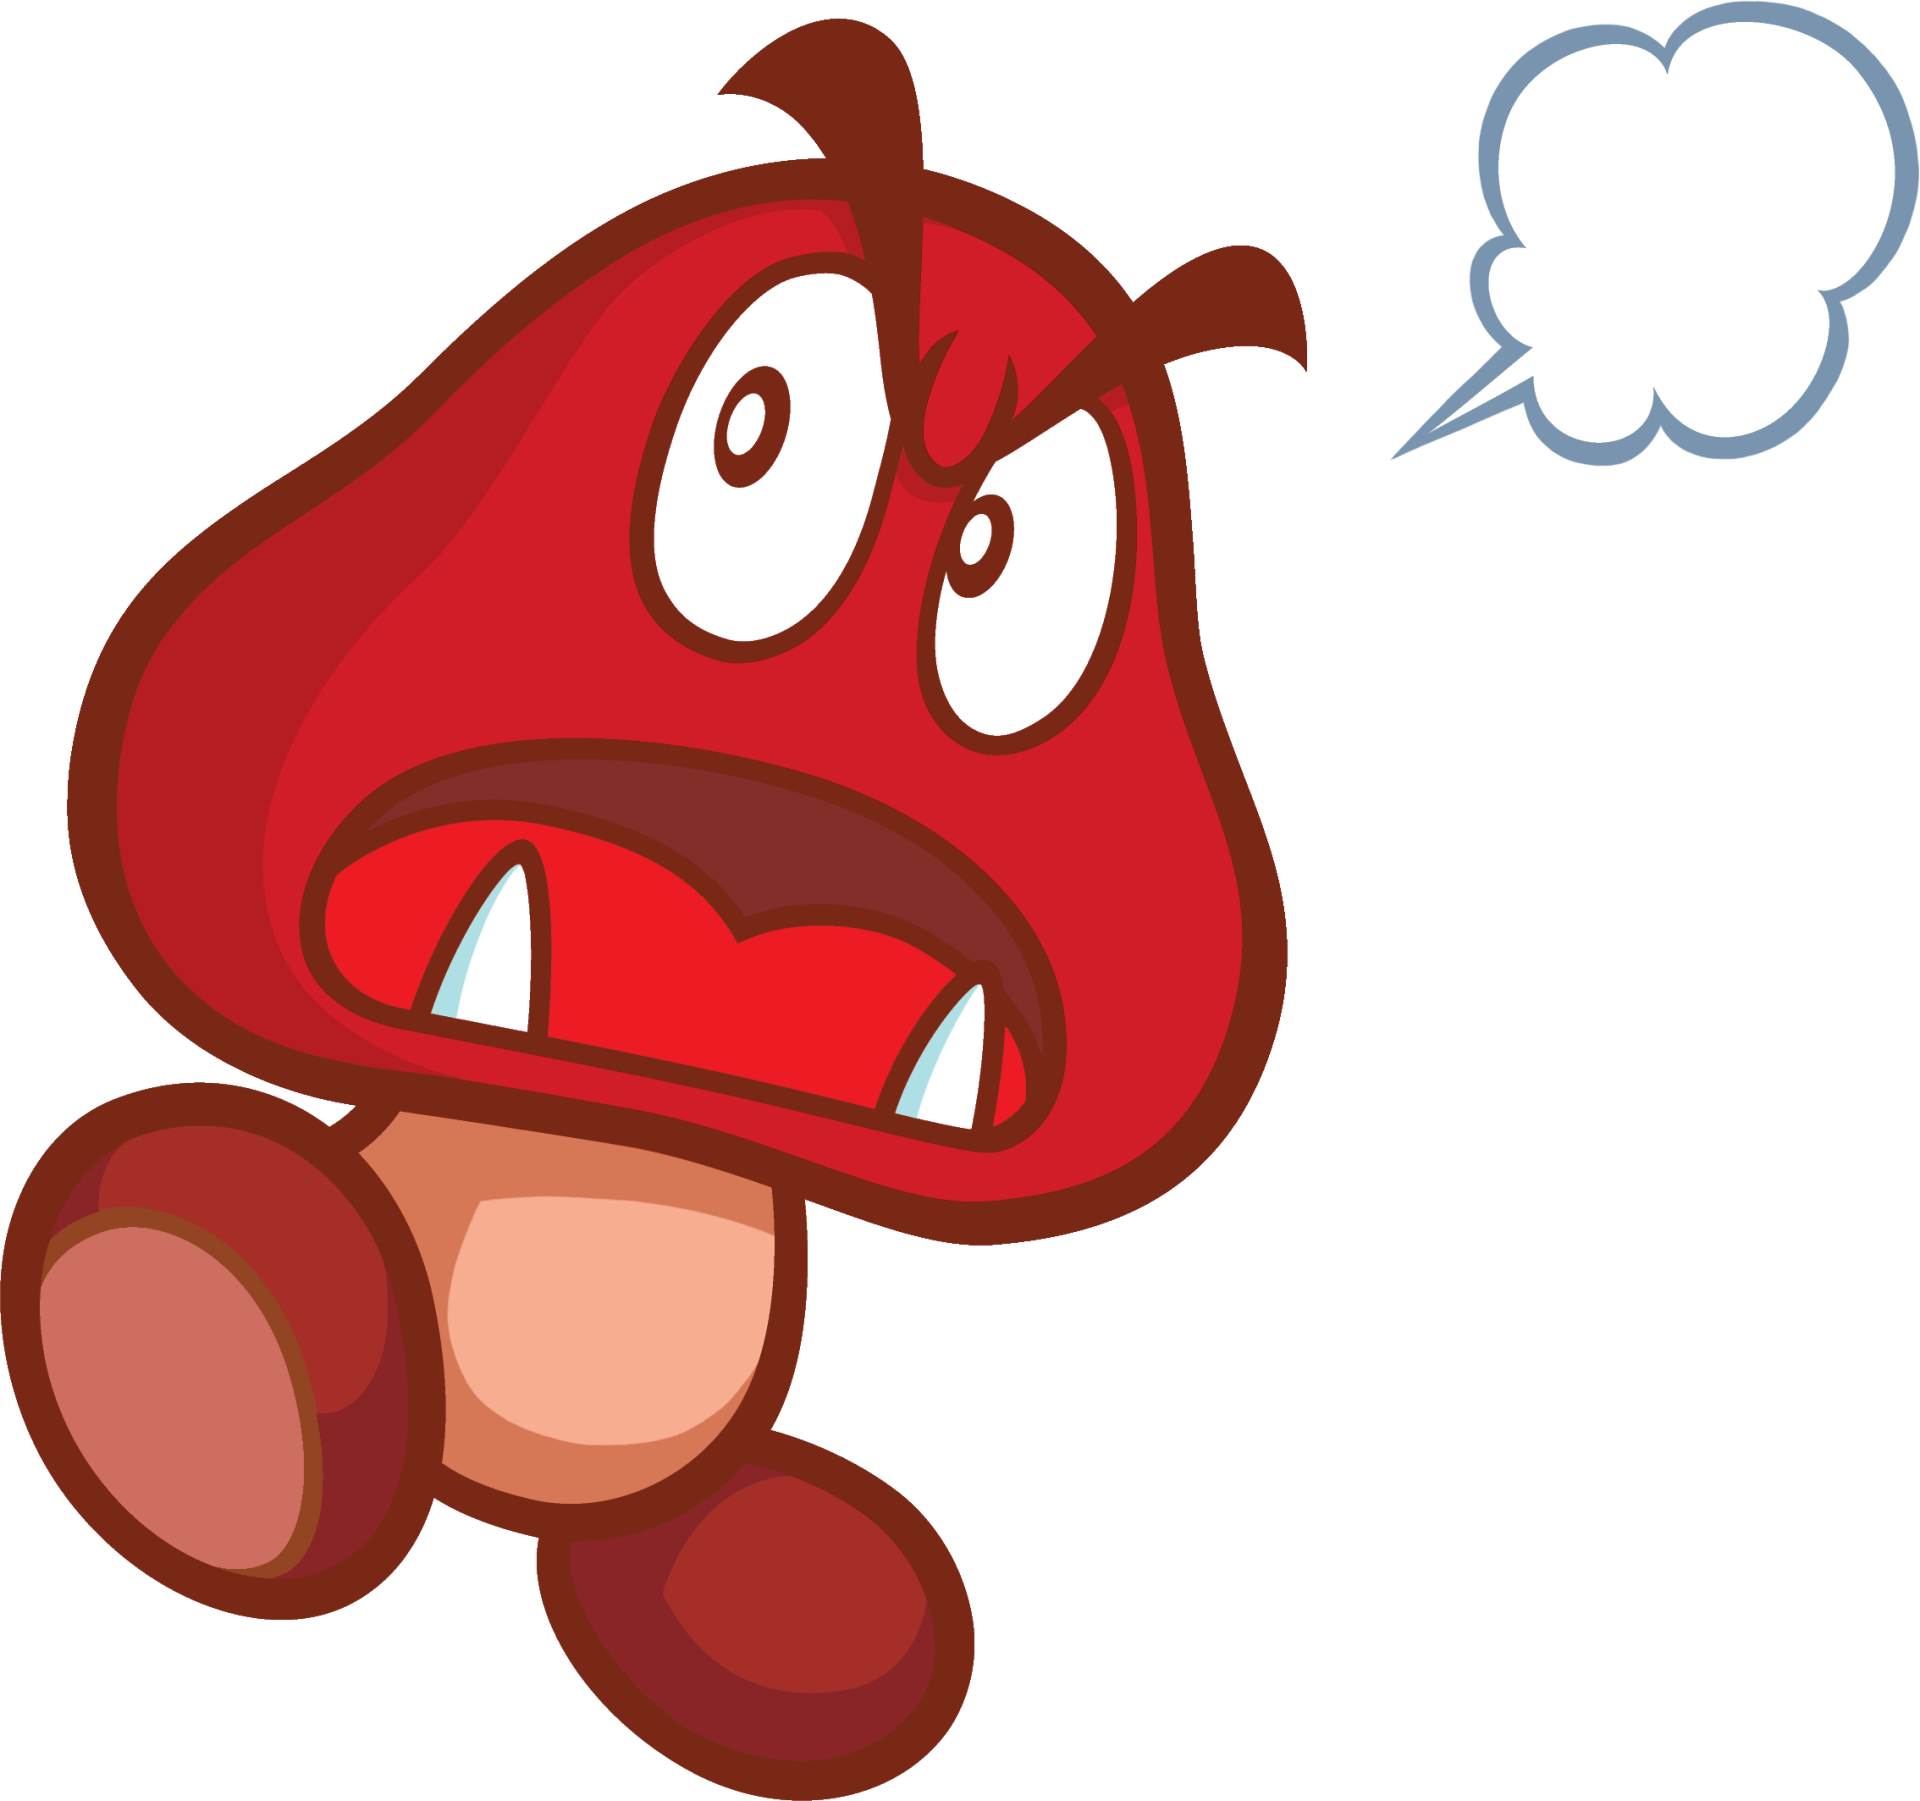 Angry Goomba Image Id 343147 Image Abyss 2290